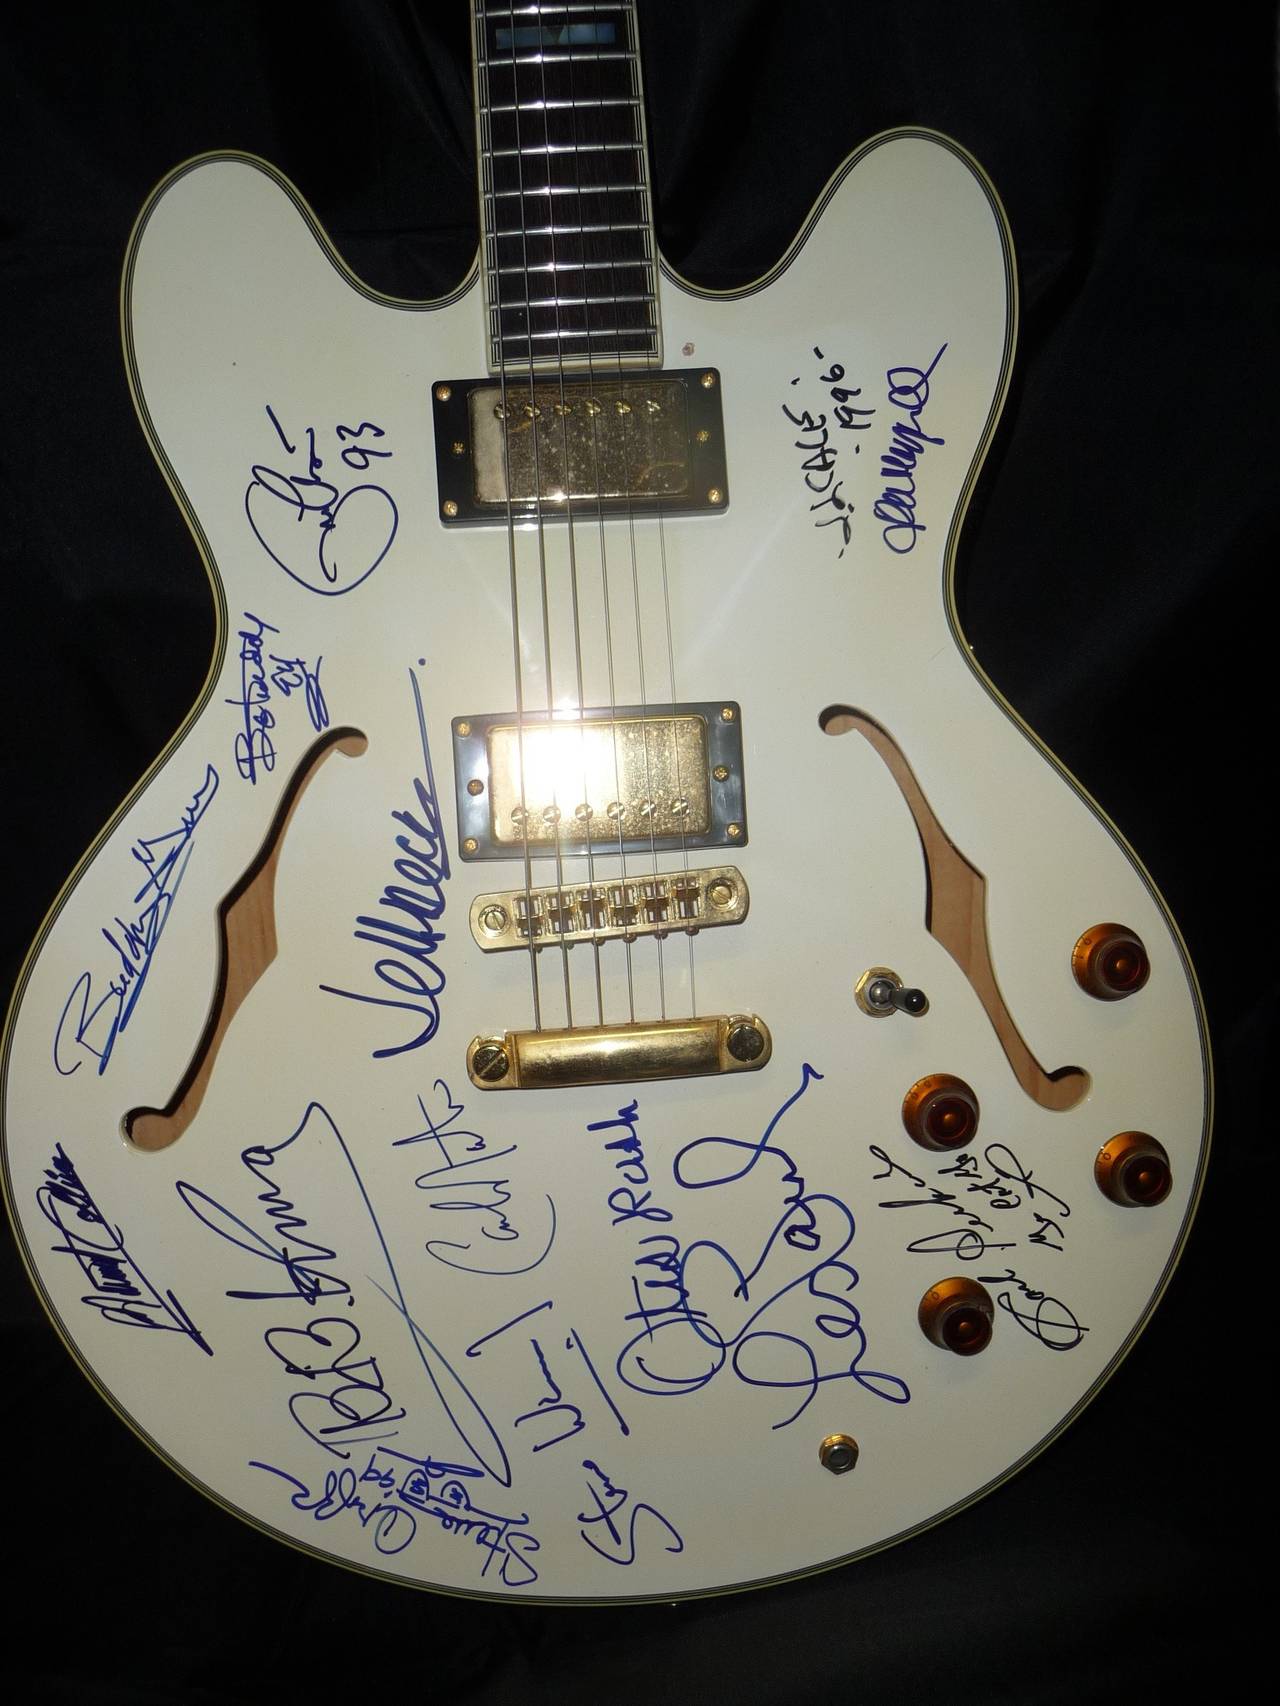 This is an Epiphone Sheraton guitar c. 1992 signed by music legends Albert Collins, Buddy Guy, Bo Diddly, Eric Clapton, JJ Cale, John Mayall, Carl Perkins, Les Paul, Otis Rush, Steve Winwood, Carlos Santana, Jeff Beck, Steve Cropper, and BB King. 